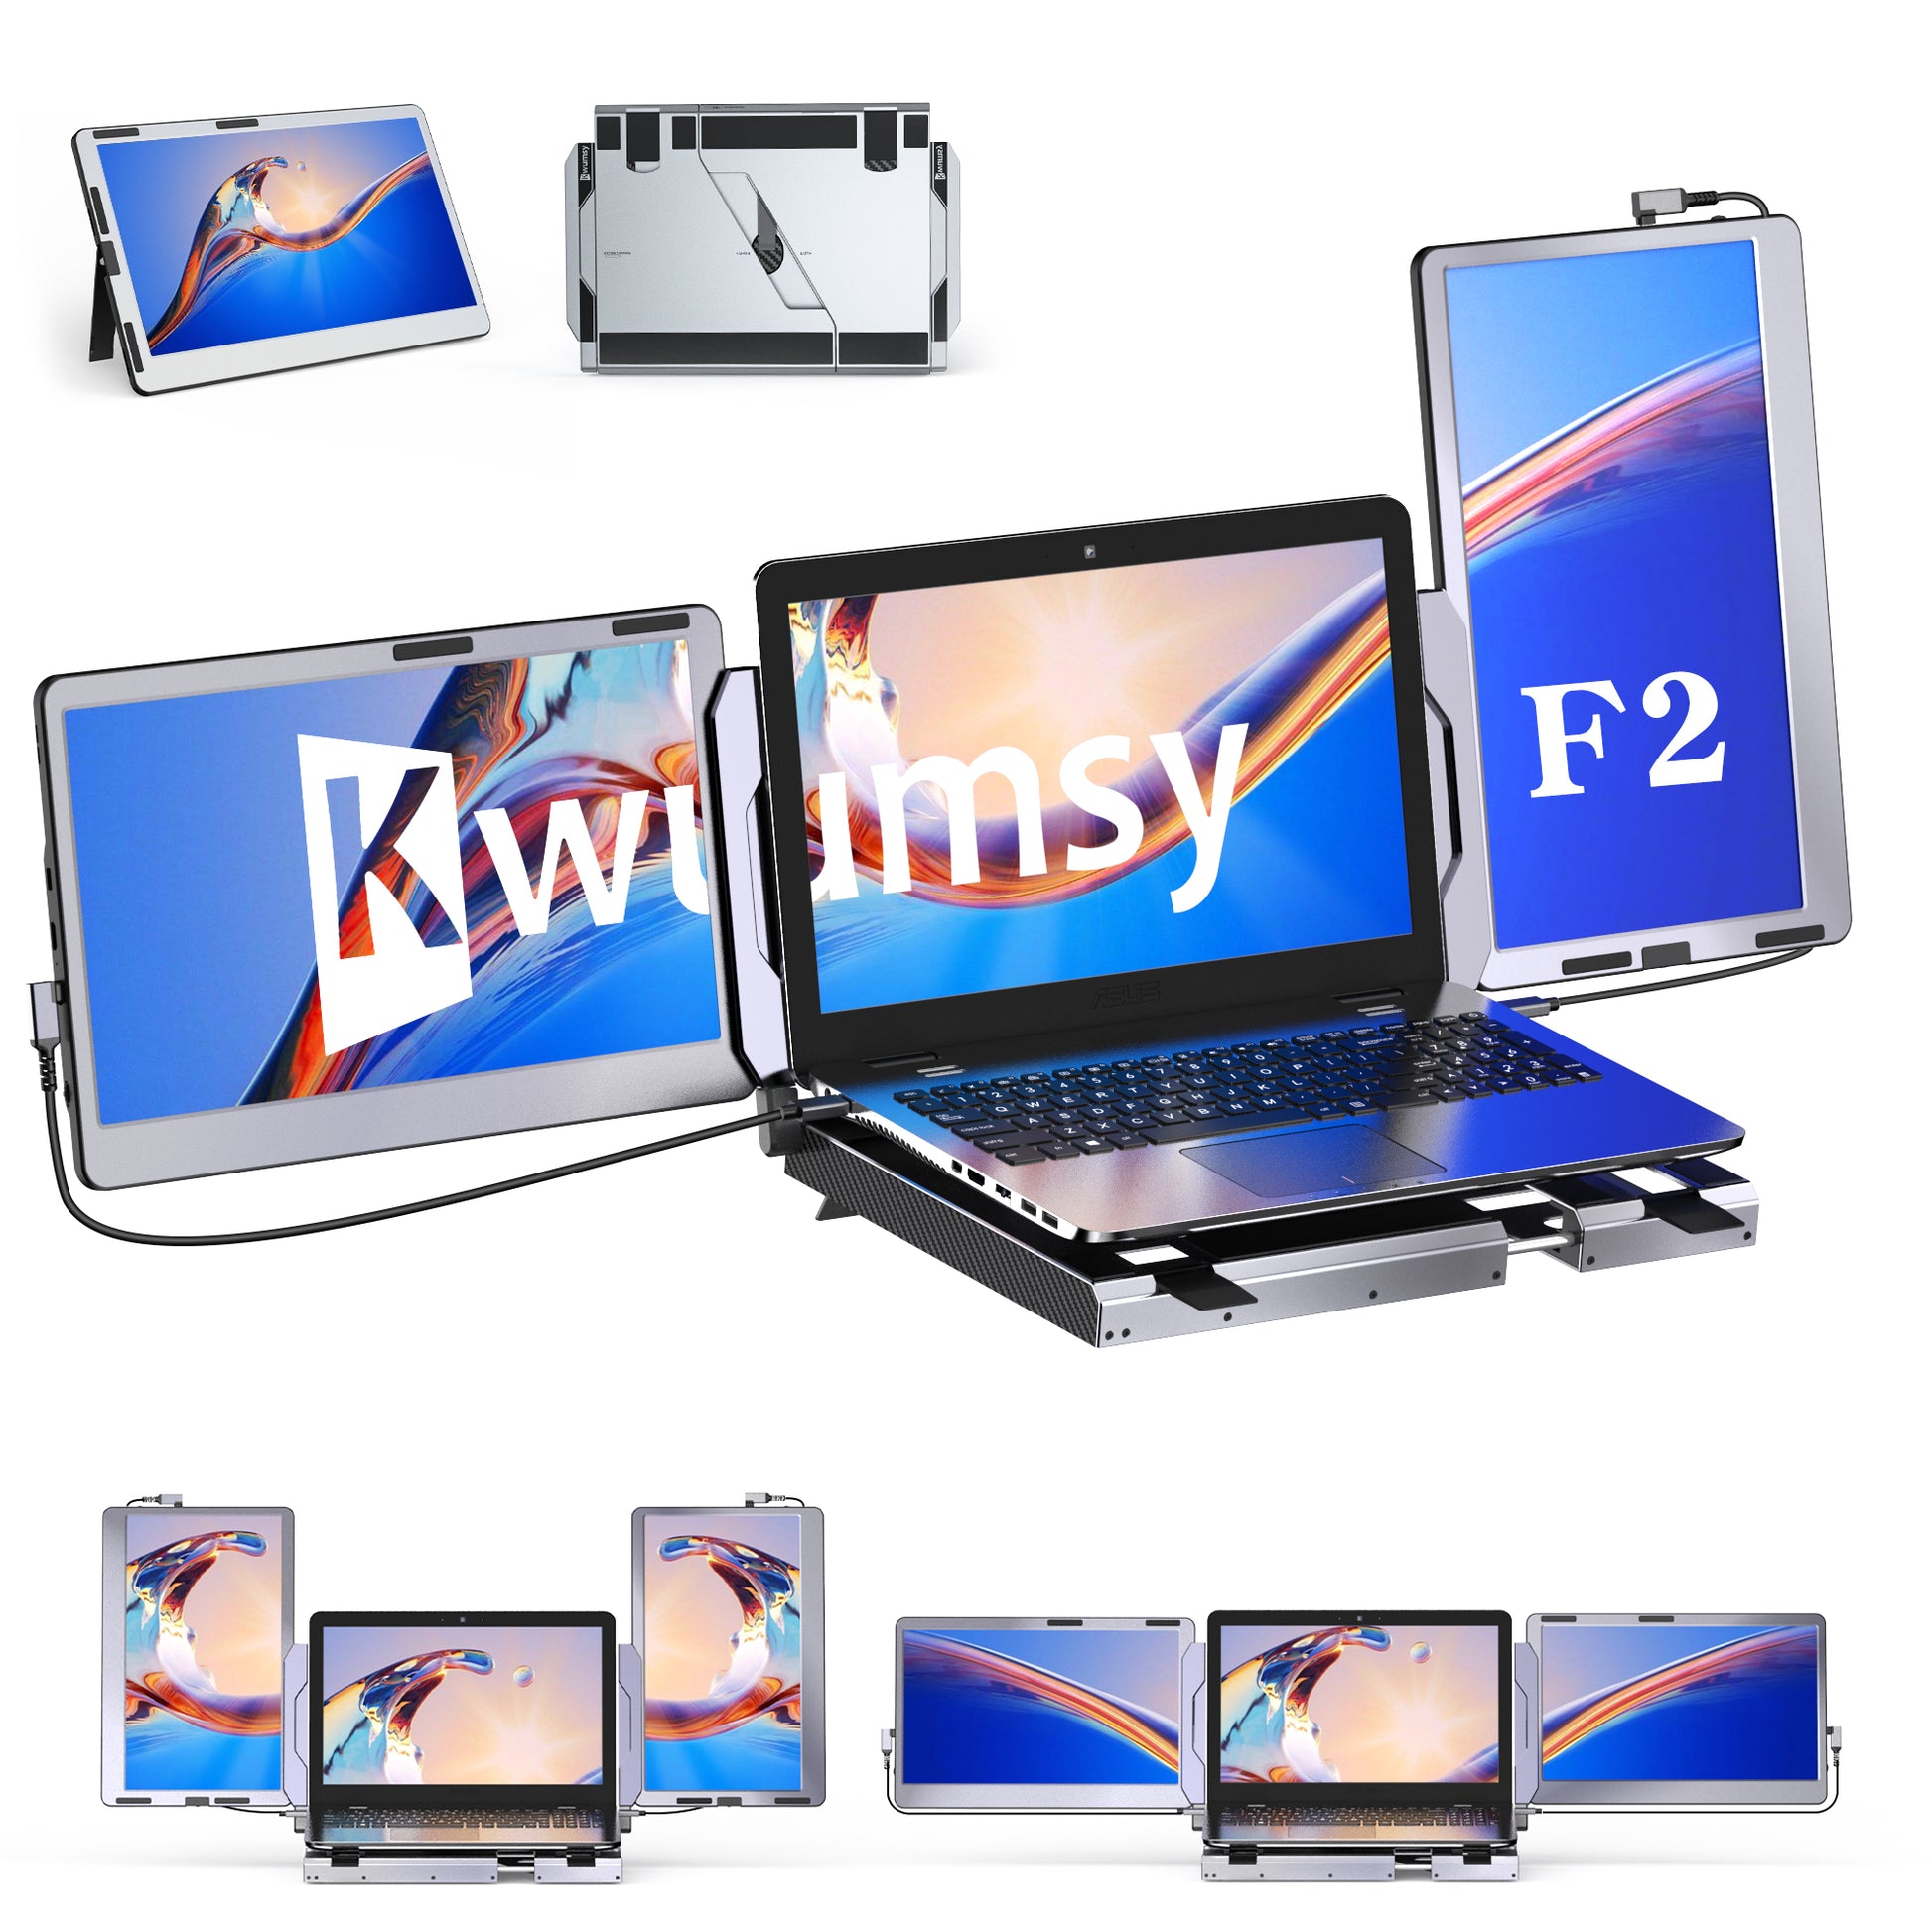 Kwumsy F2 Laptop Triple 14\'\' Monitor Portable